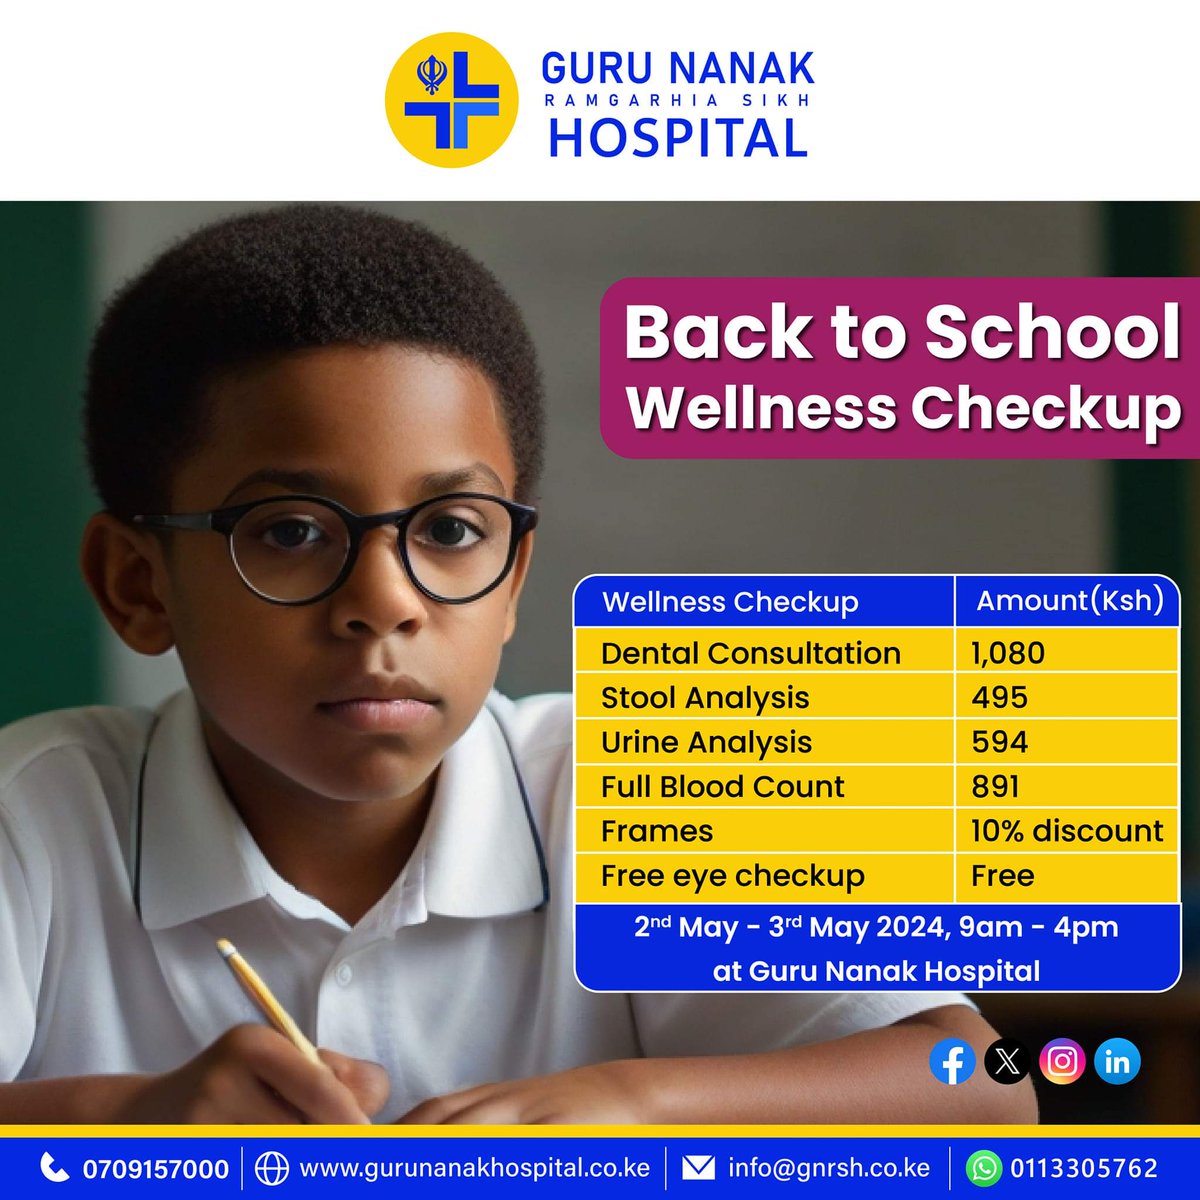 Be ready for the Second Term with our #BackToSchool  wellness package! Get dental consultations, stool and urine analysis, full blood count, plus a free eye checkup!  And don't forget, students receive a 10% discount on frames #WellnessPackage  #HealthyStudents #EyeCare